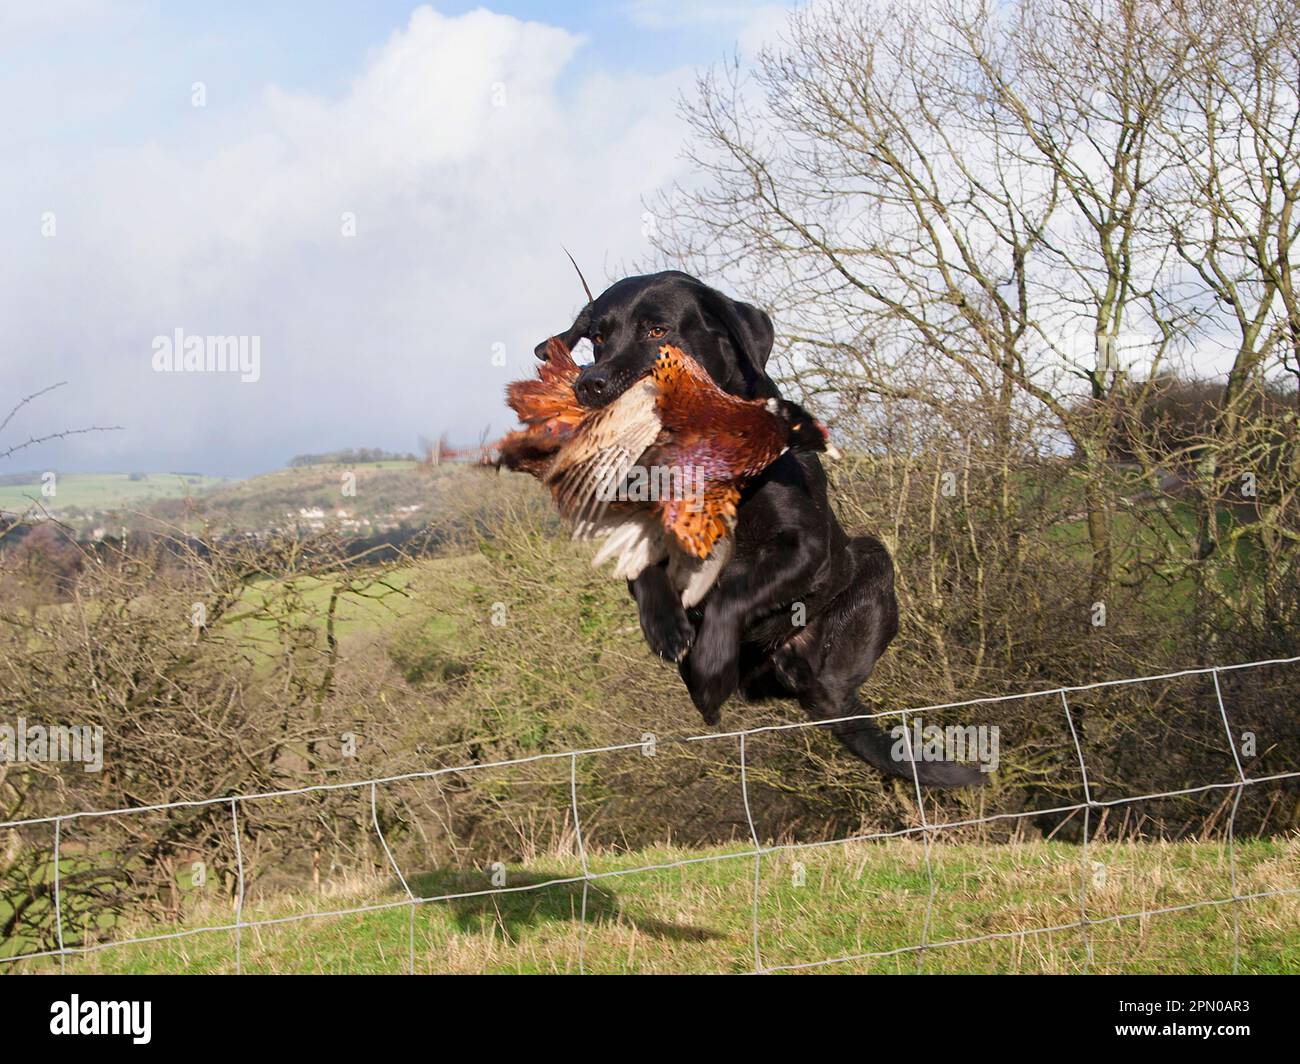 Domestic dog, Black Labrador Retriever, adult, holding shot pheasant (Phasianus colchicus) in mouth, jumping over wire fence and retrieving game at Stock Photo